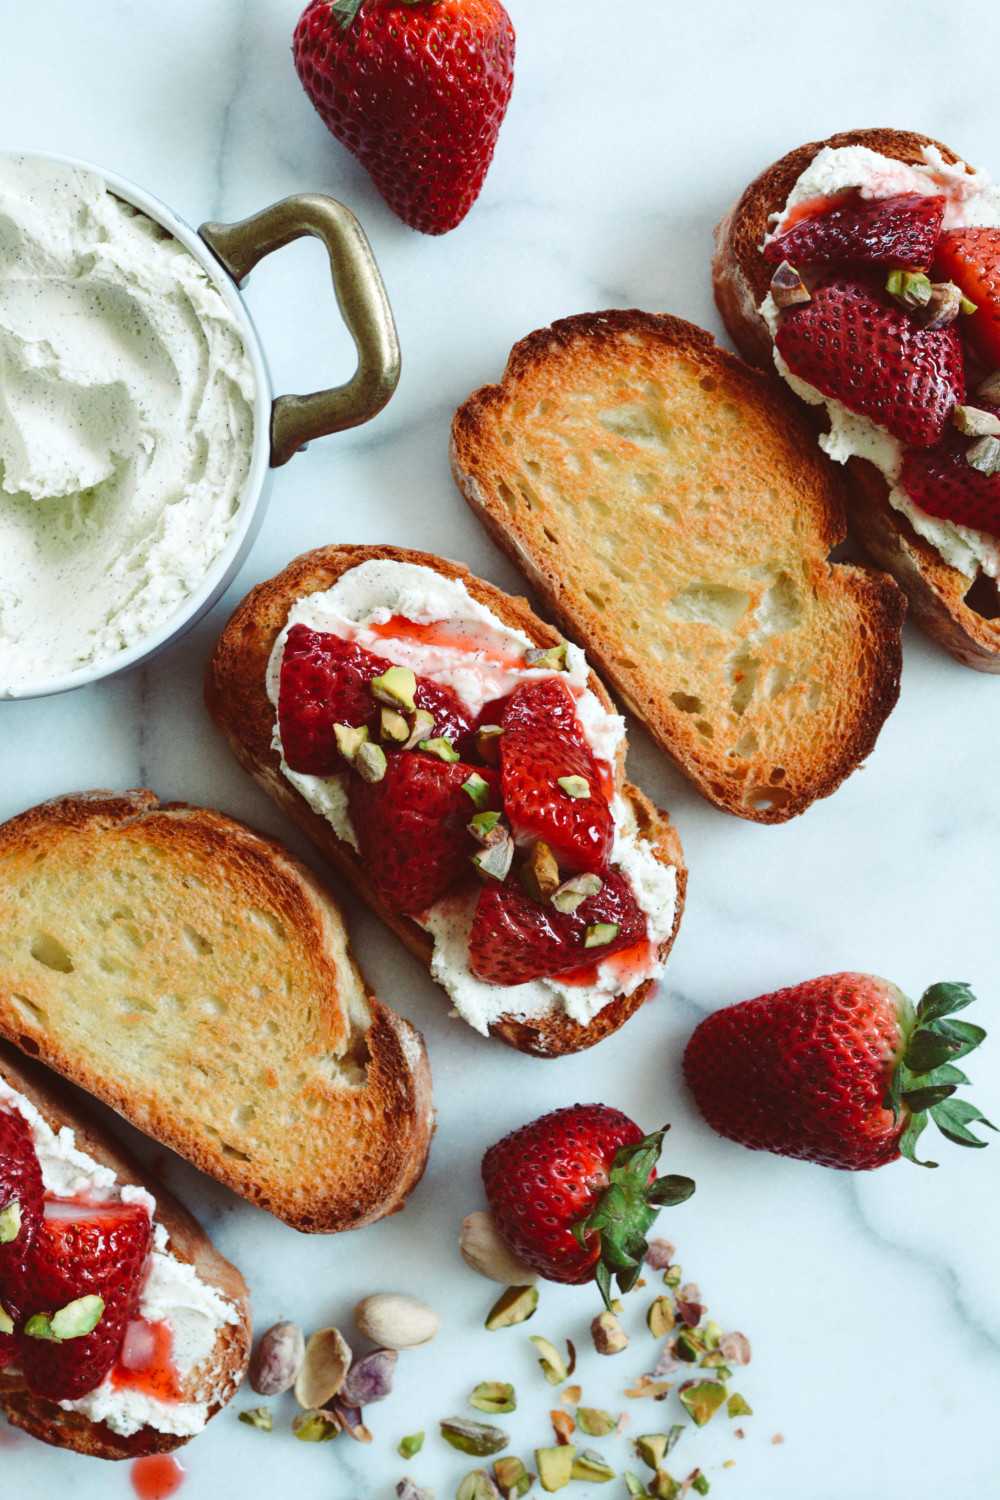 Roasted Strawberries & Pistachios with Vanilla Bean Whipped Mascarpone ...